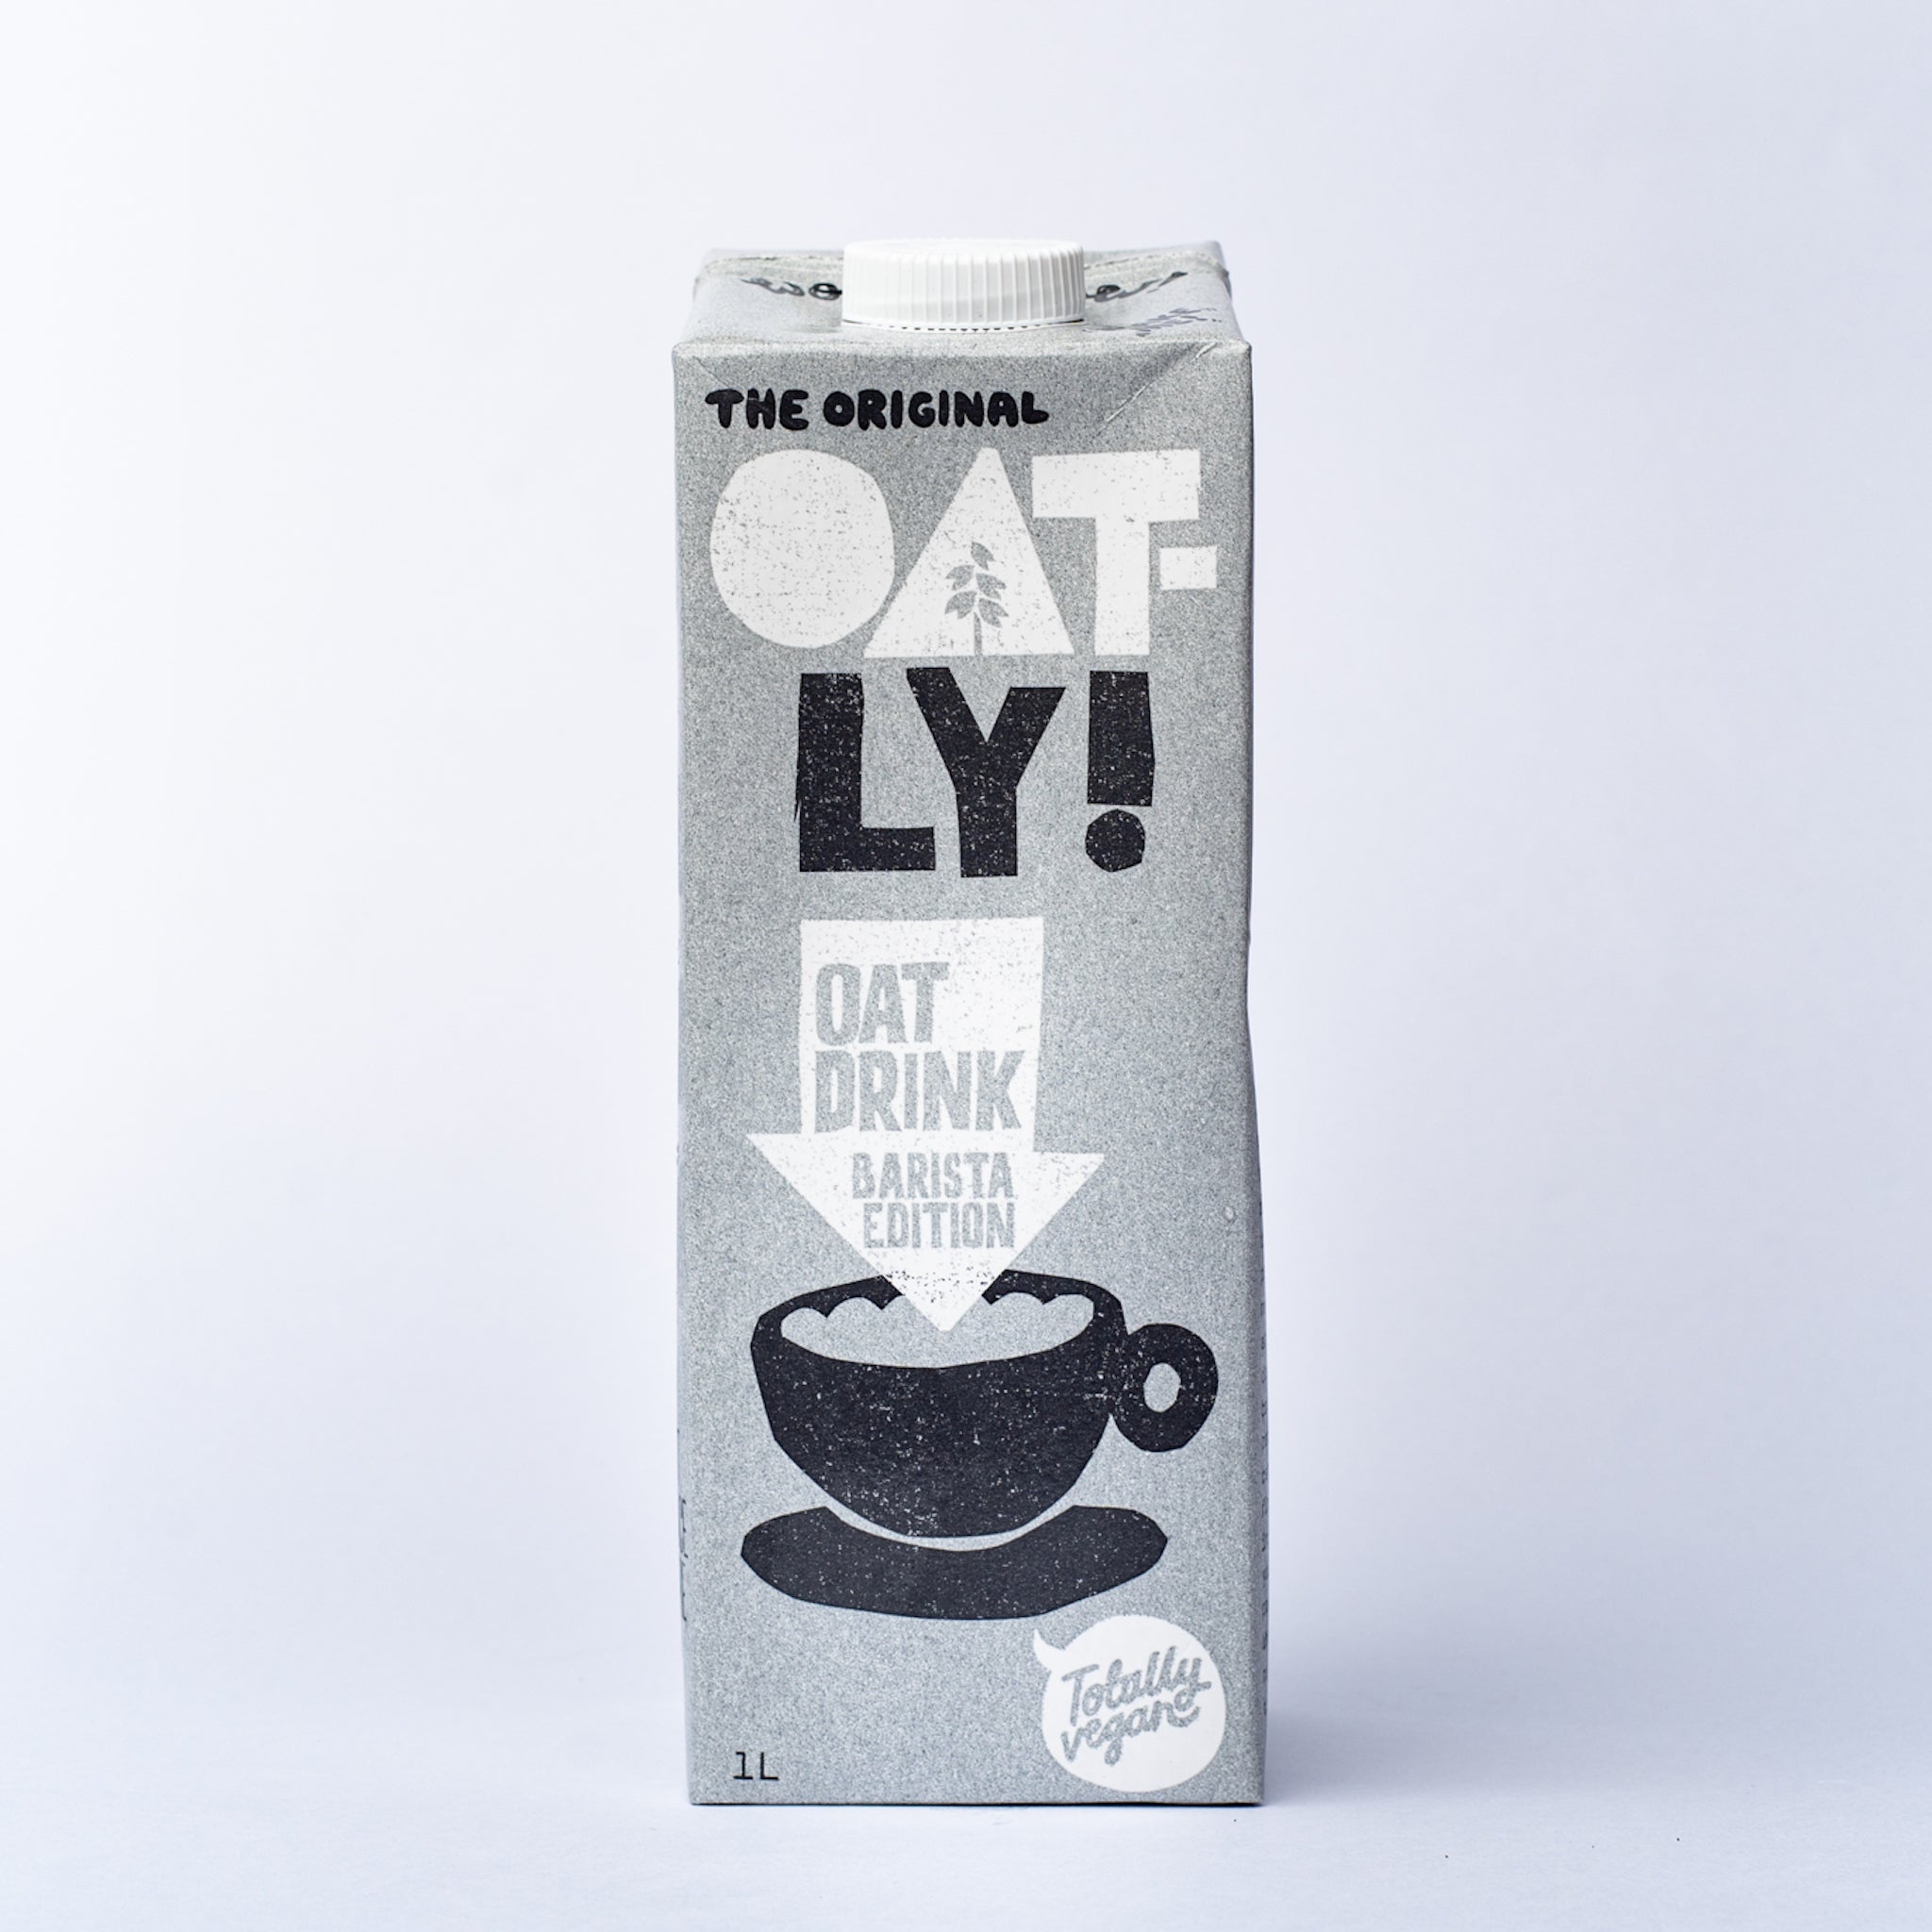 A 1l tetra pack of Oatly Barista Edition.